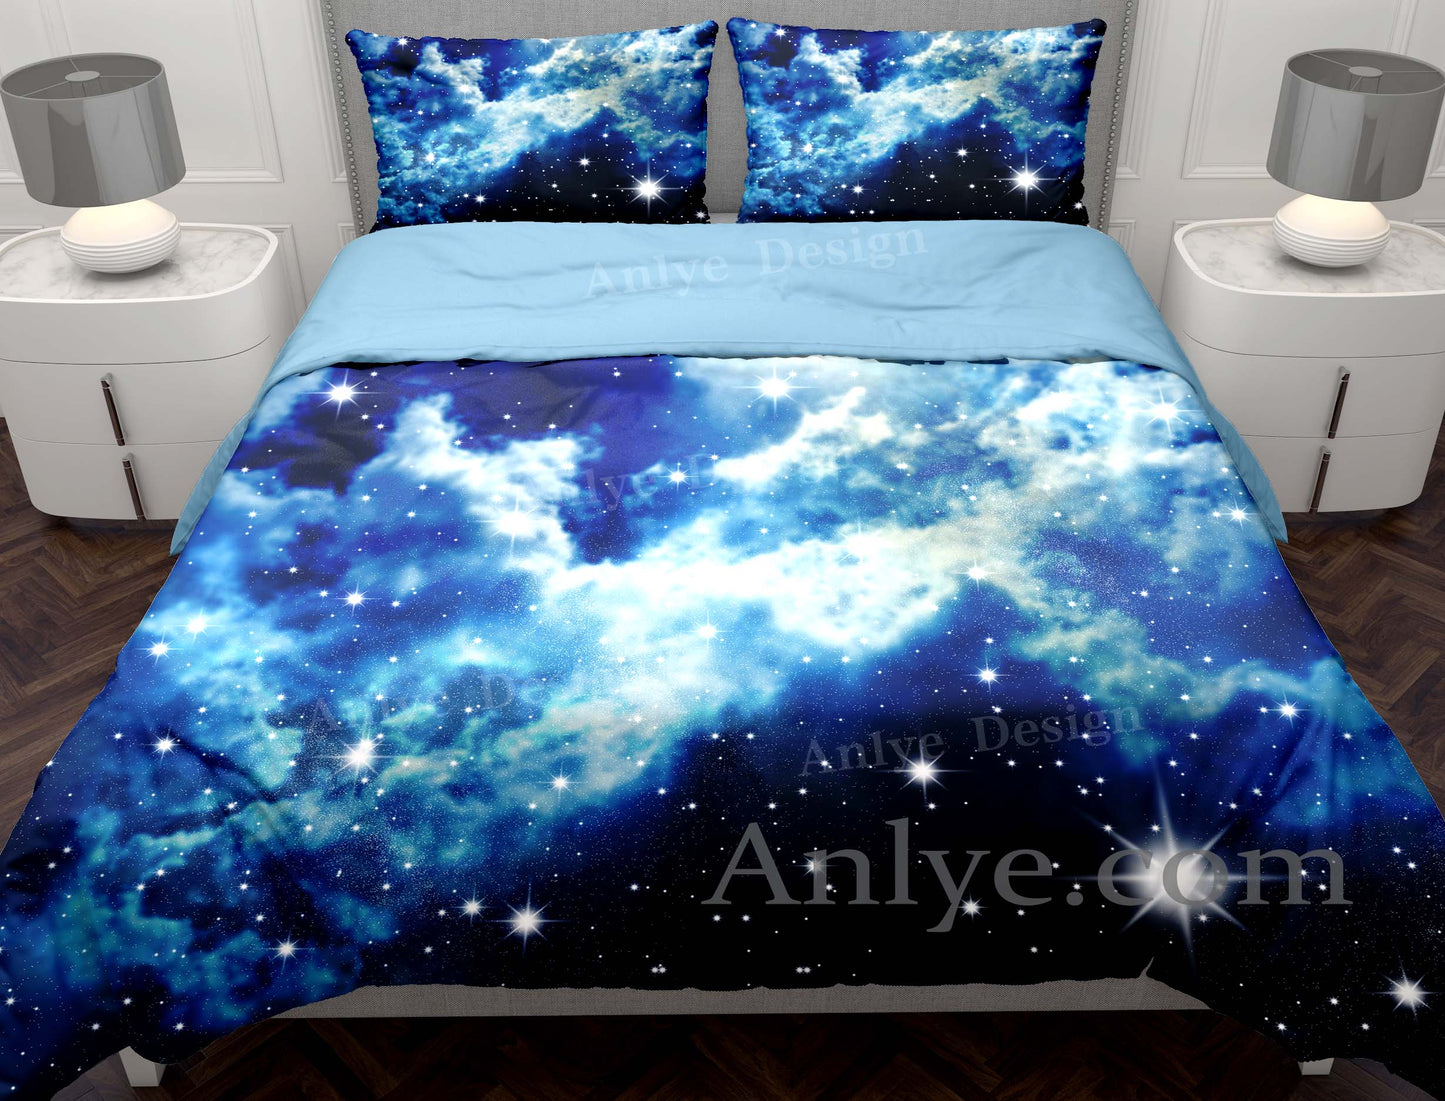 3D Cloudy Skies Duvet Cover Set: A Hot-Selling Gift for a Boy or Girl's Room - Vibrant and Colorful, Perfect for Any Bedroom